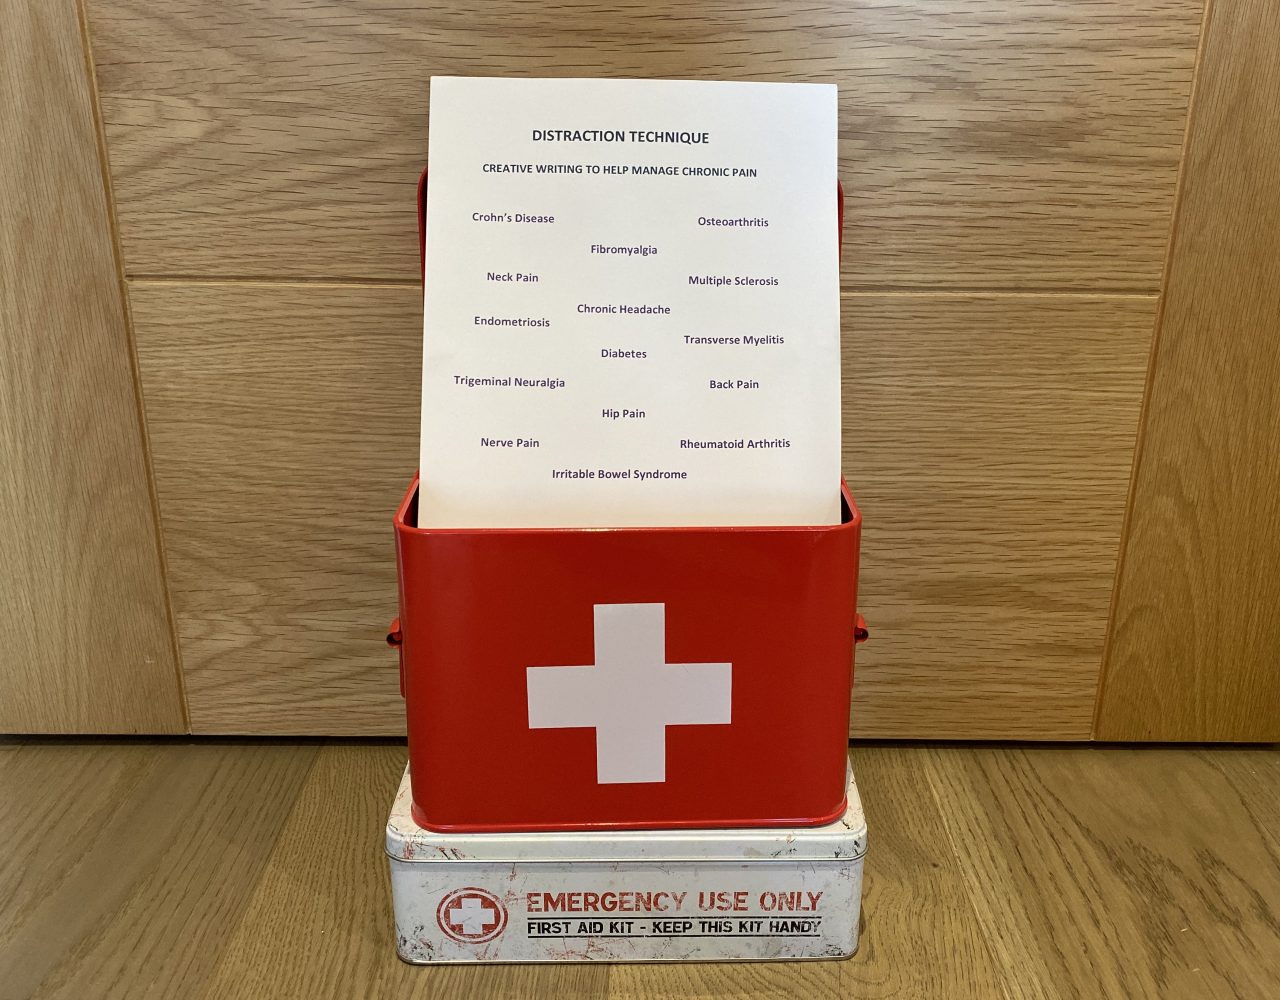 A red first aid box with a piece of paper standing in it. The paper is titled ‘Distraction Technique’ and has words like ‘Hip Pain,’ ‘Multiple Sclerosis,’ and ‘Fibromyalgia’ on it.